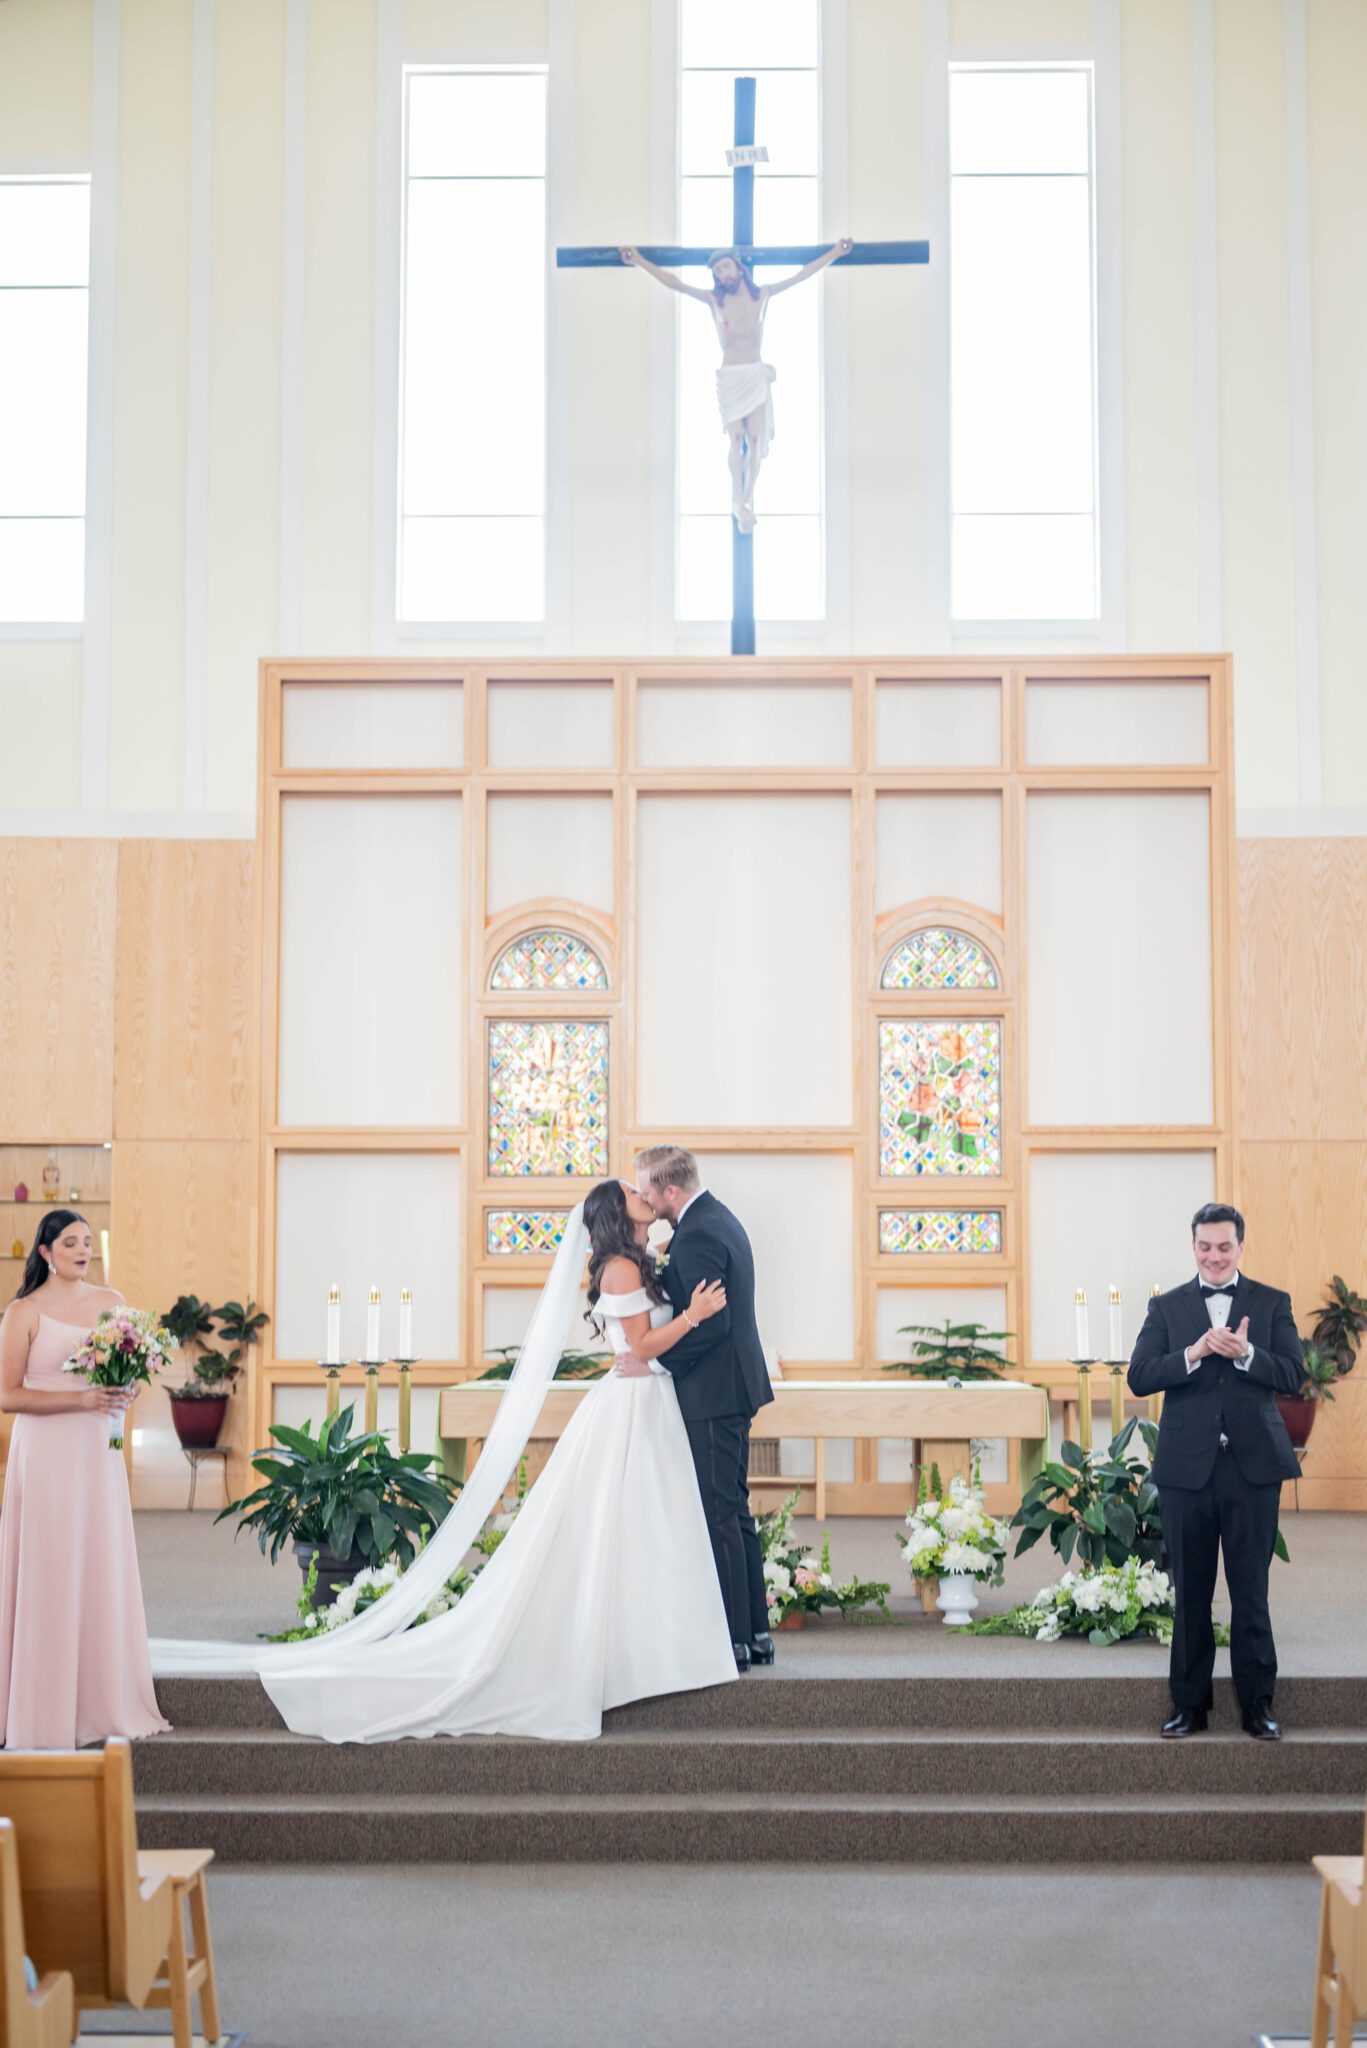 Bride and groom share their first kiss at the altar as husband and wife, in bright Catholic church. 